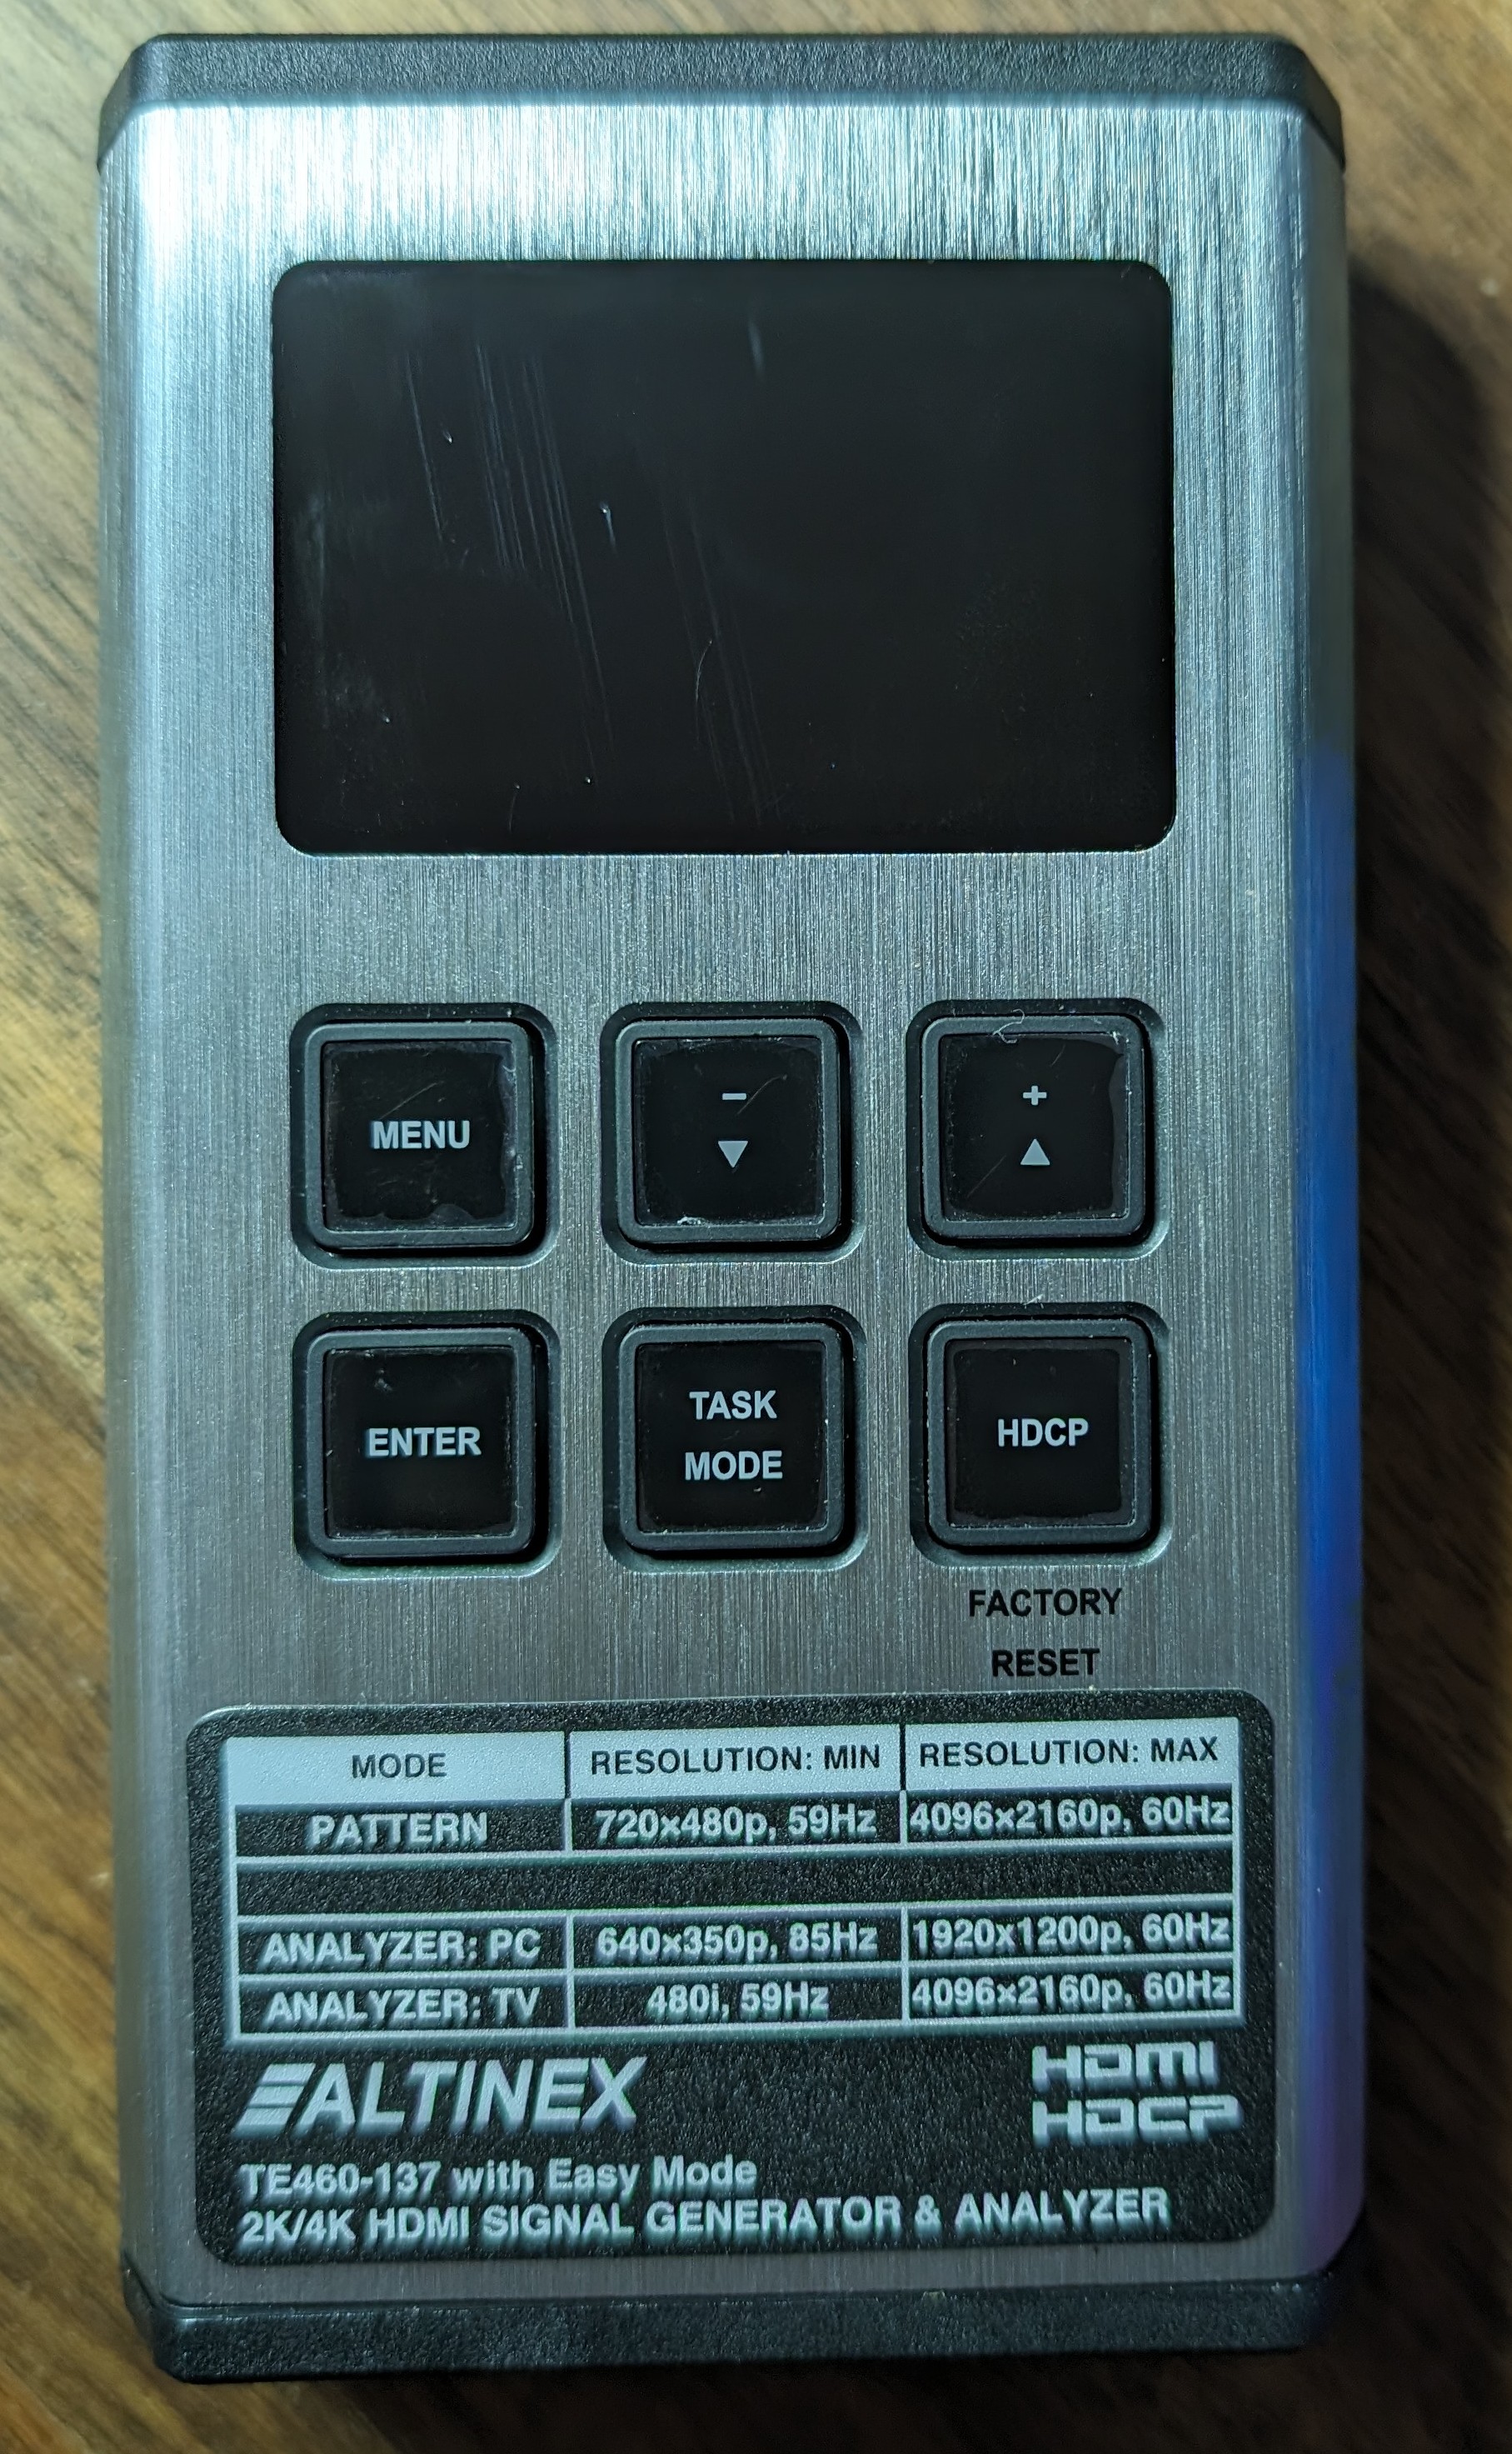 Front of the device.